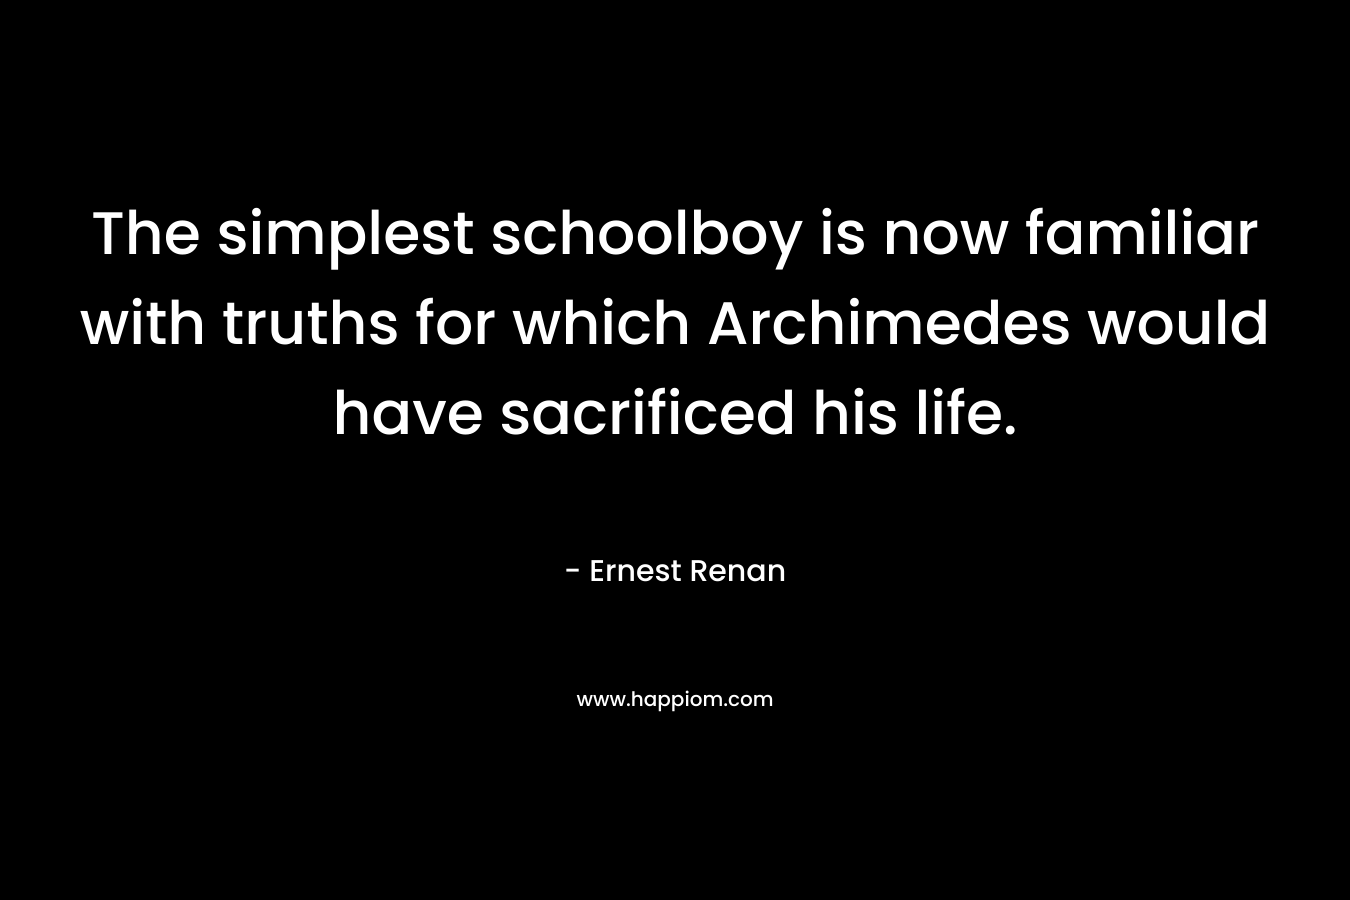 The simplest schoolboy is now familiar with truths for which Archimedes would have sacrificed his life. – Ernest Renan